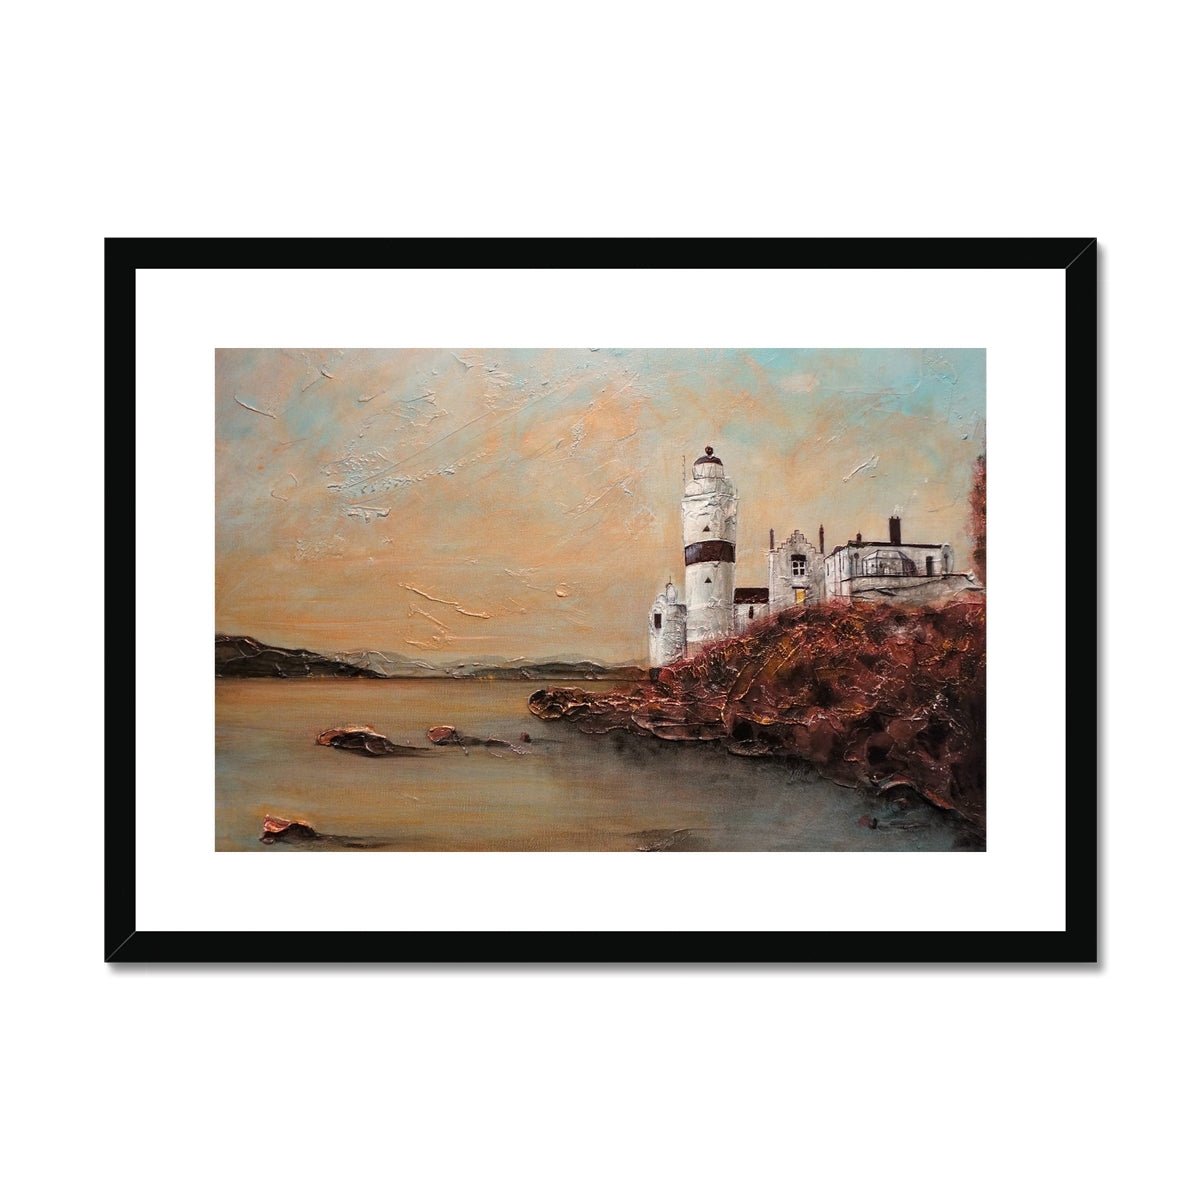 Cloch Lighthouse Dawn Painting | Framed & Mounted Prints From Scotland-Framed & Mounted Prints-River Clyde Art Gallery-A2 Landscape-Black Frame-Paintings, Prints, Homeware, Art Gifts From Scotland By Scottish Artist Kevin Hunter